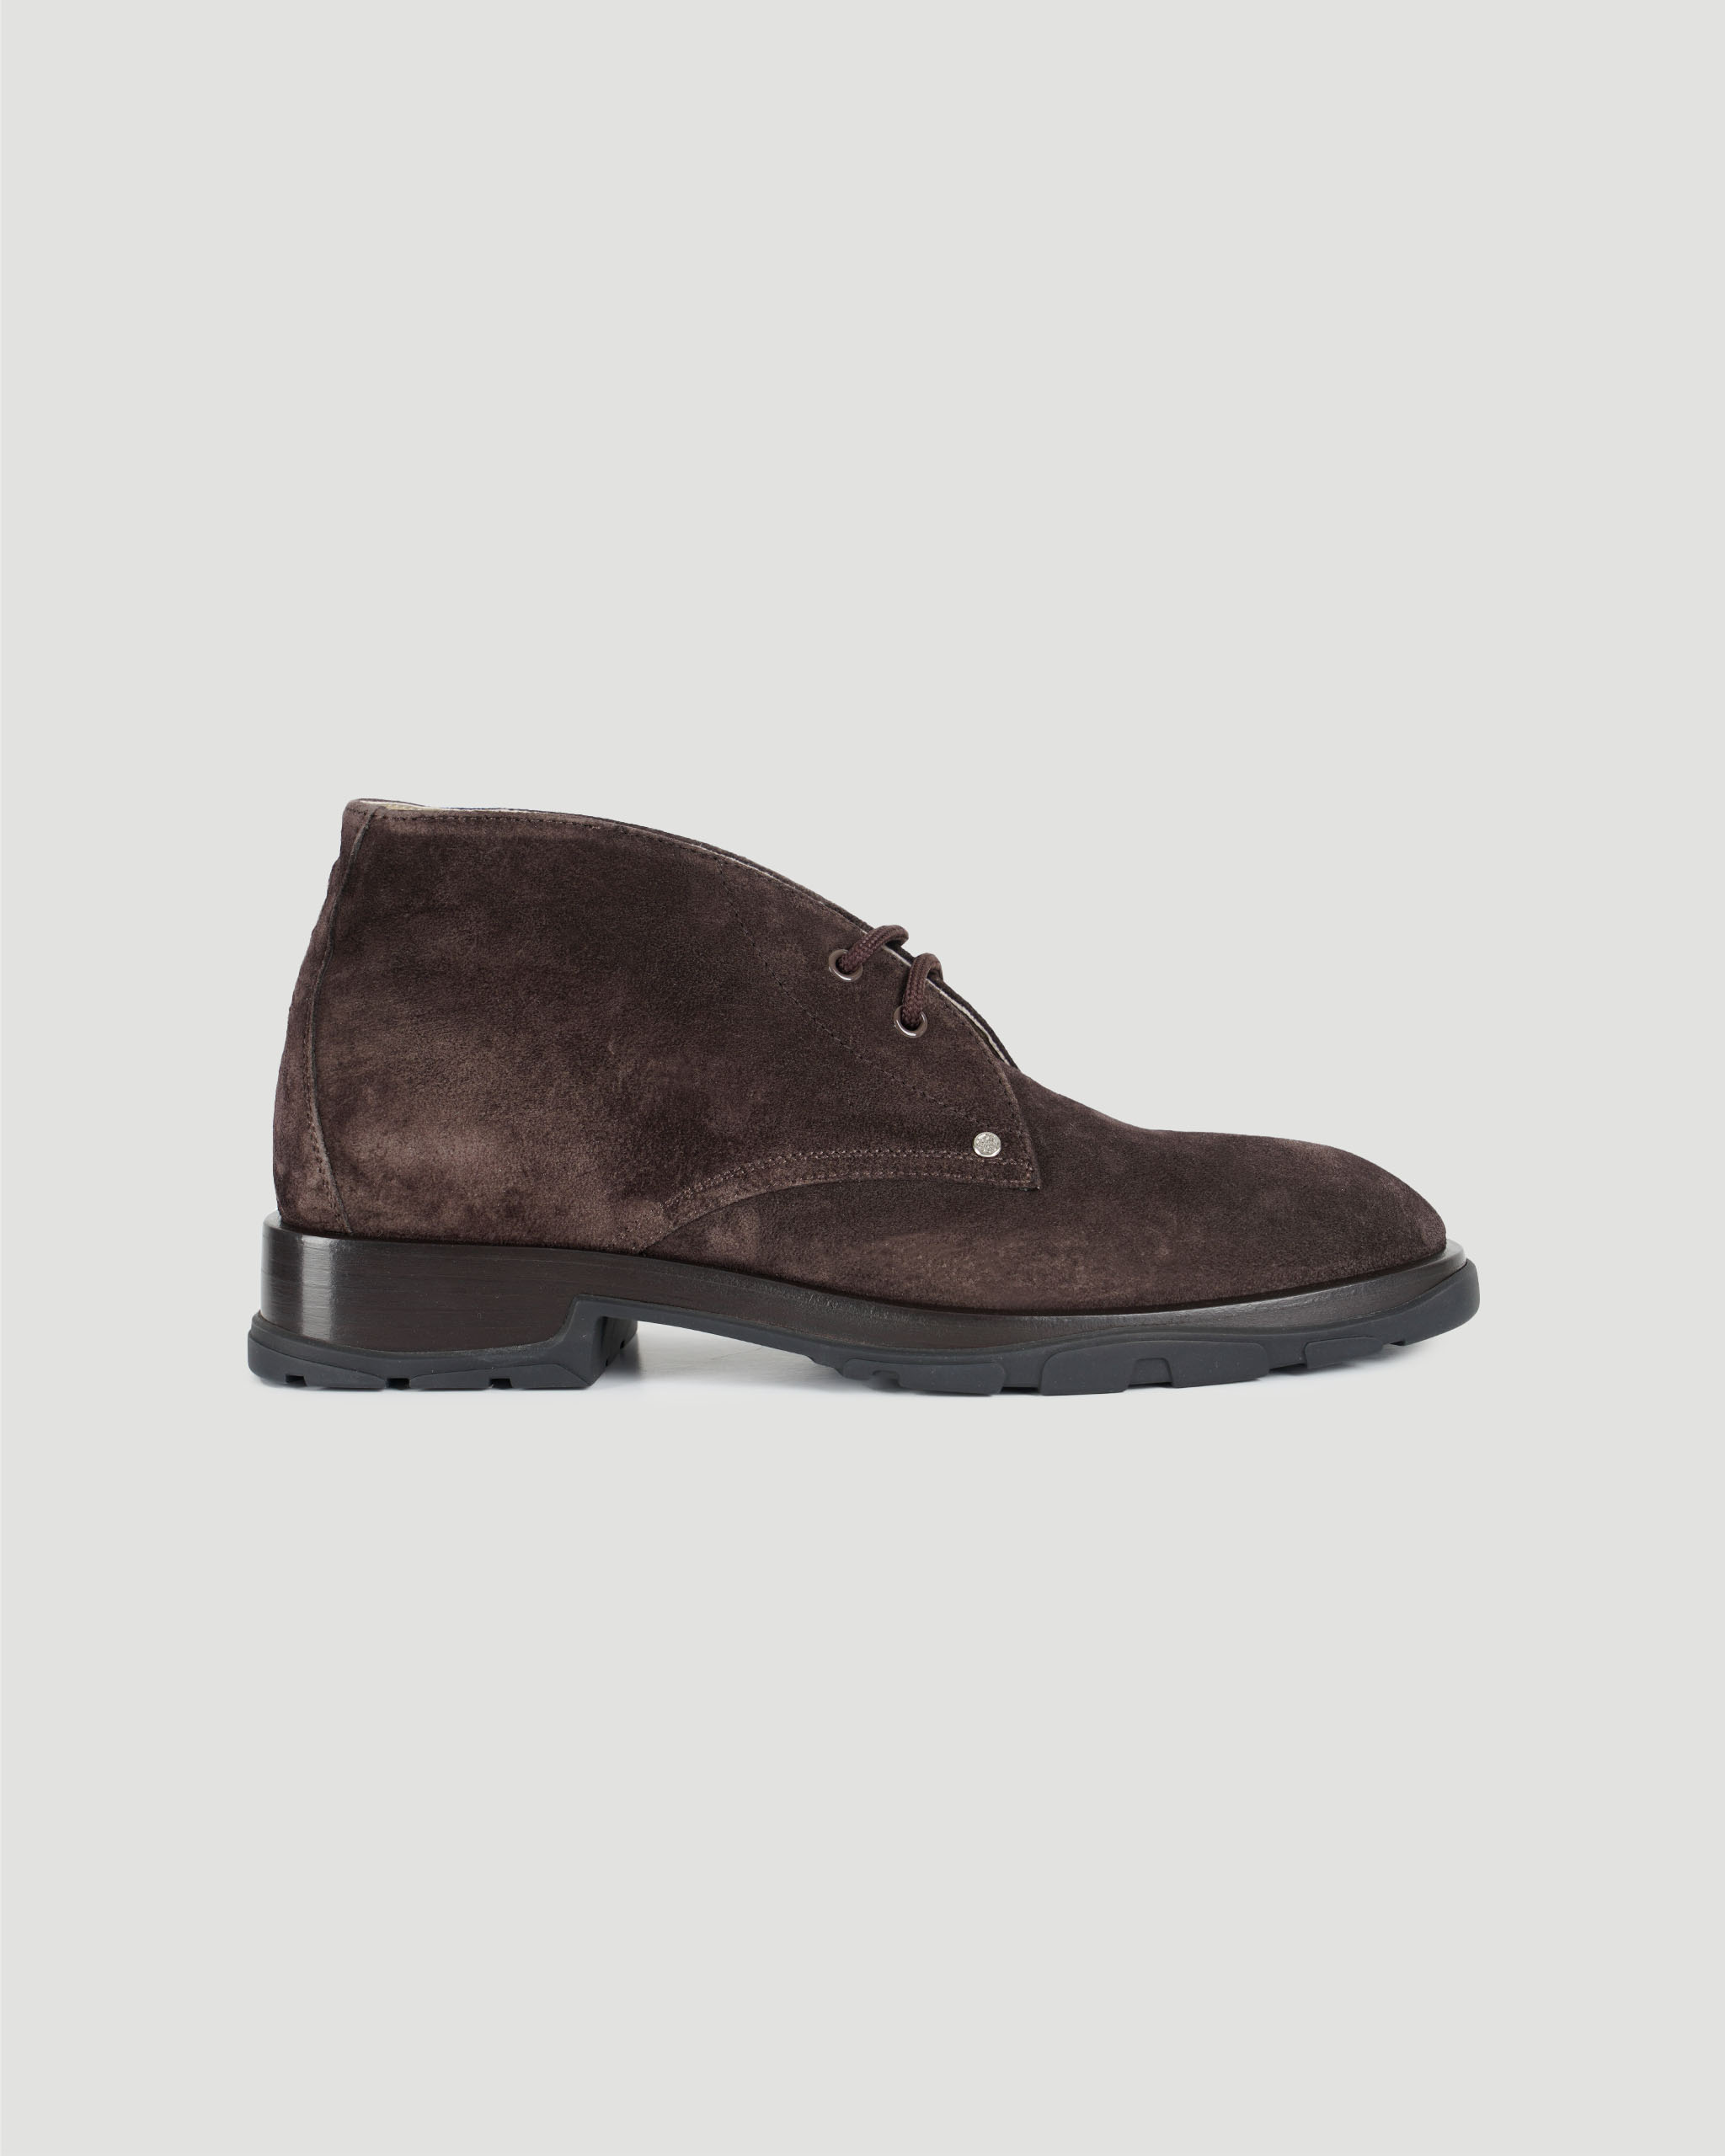 Suede boots in brown - All-U-Re